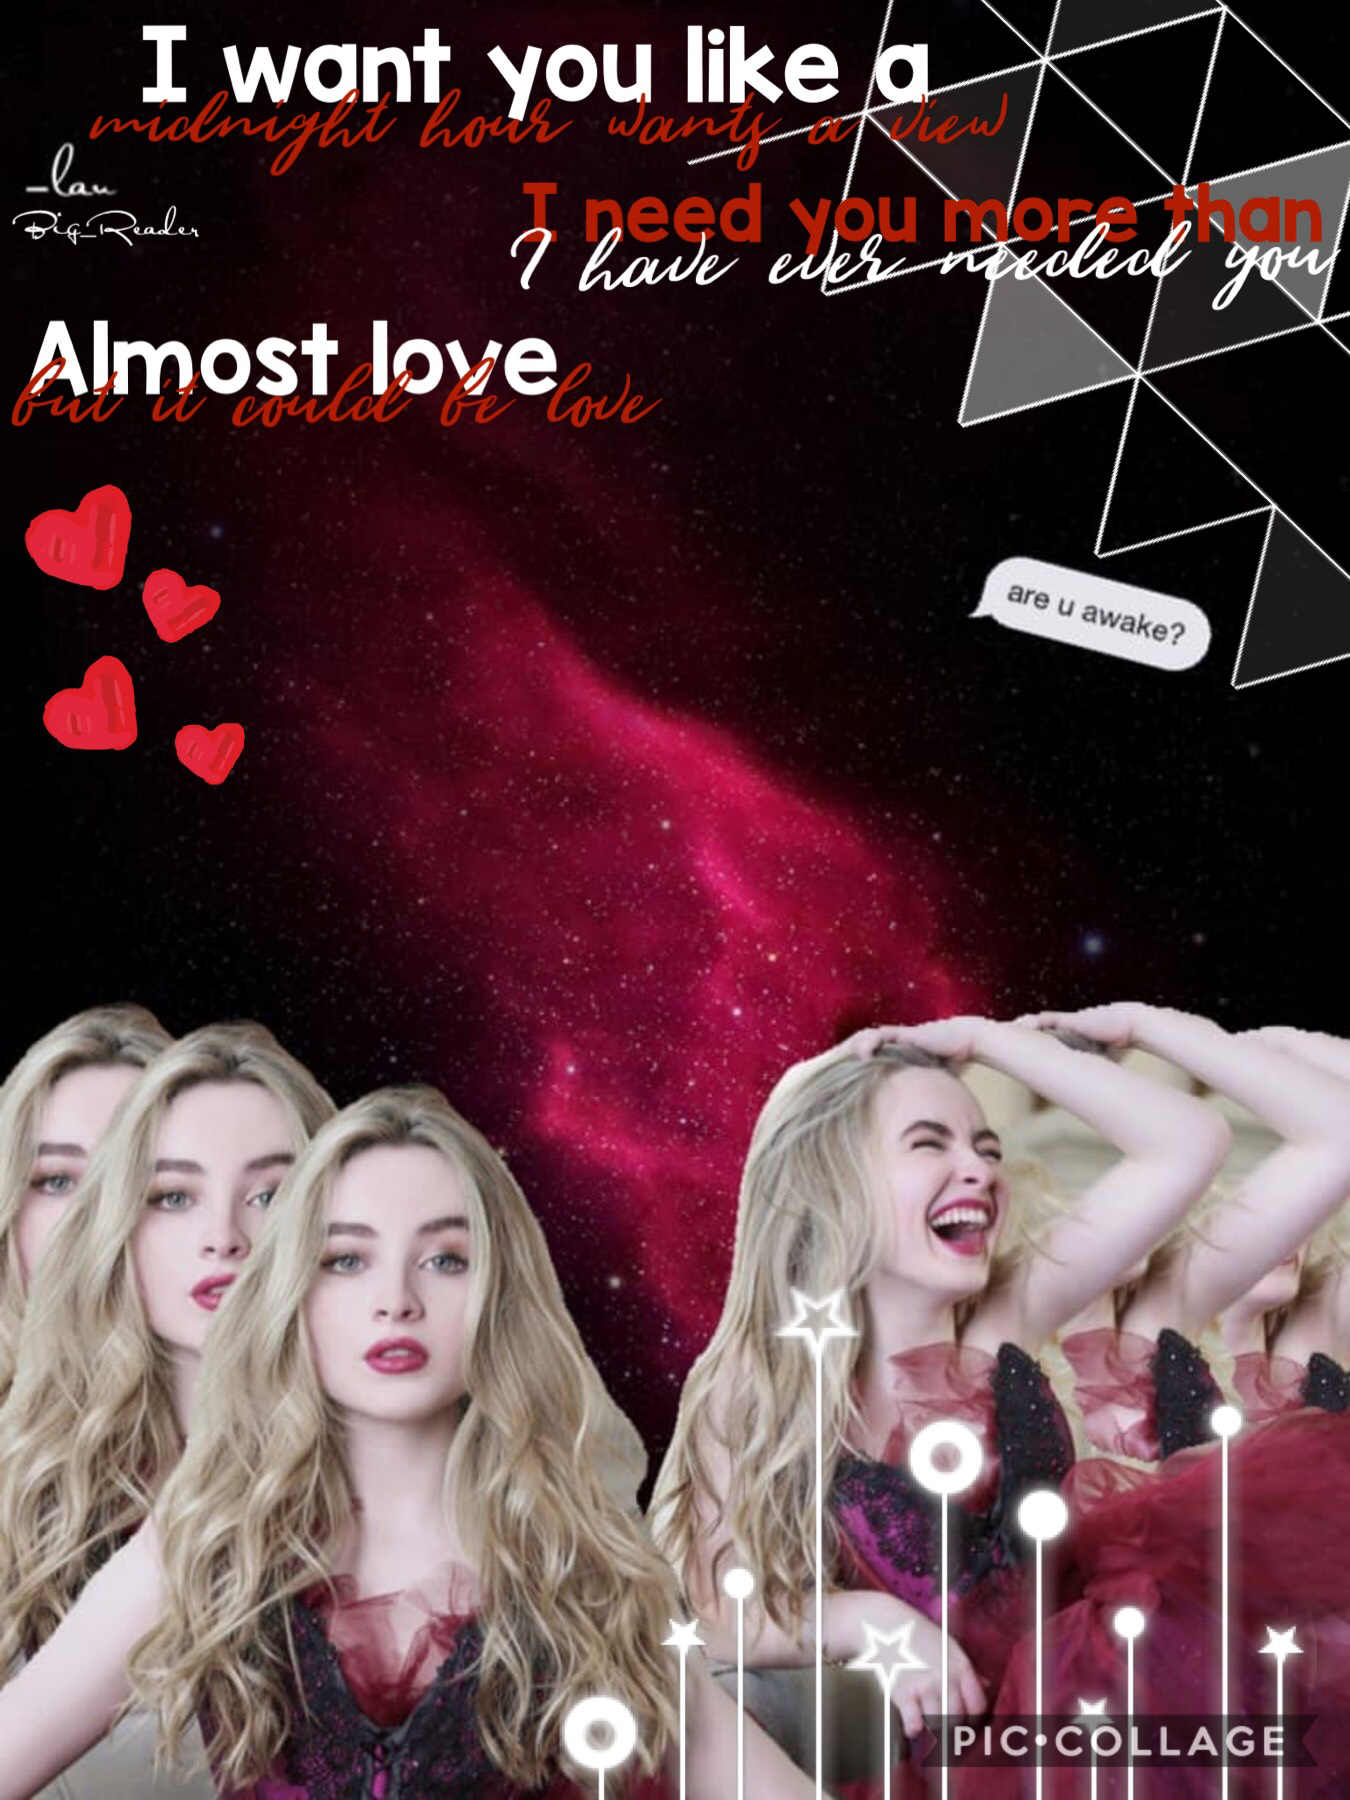 Collab with -lau !! 💕💕😆
She is sooo talented and kind! Check out her account! She did the background and the pics of Sabby and I did the quote and pngs✨ I love Sabrina Carpenter!!😱 QOTD: favorite song by Sabrina Carpenter ?  🎶 AOTD: Sue Meeee😂